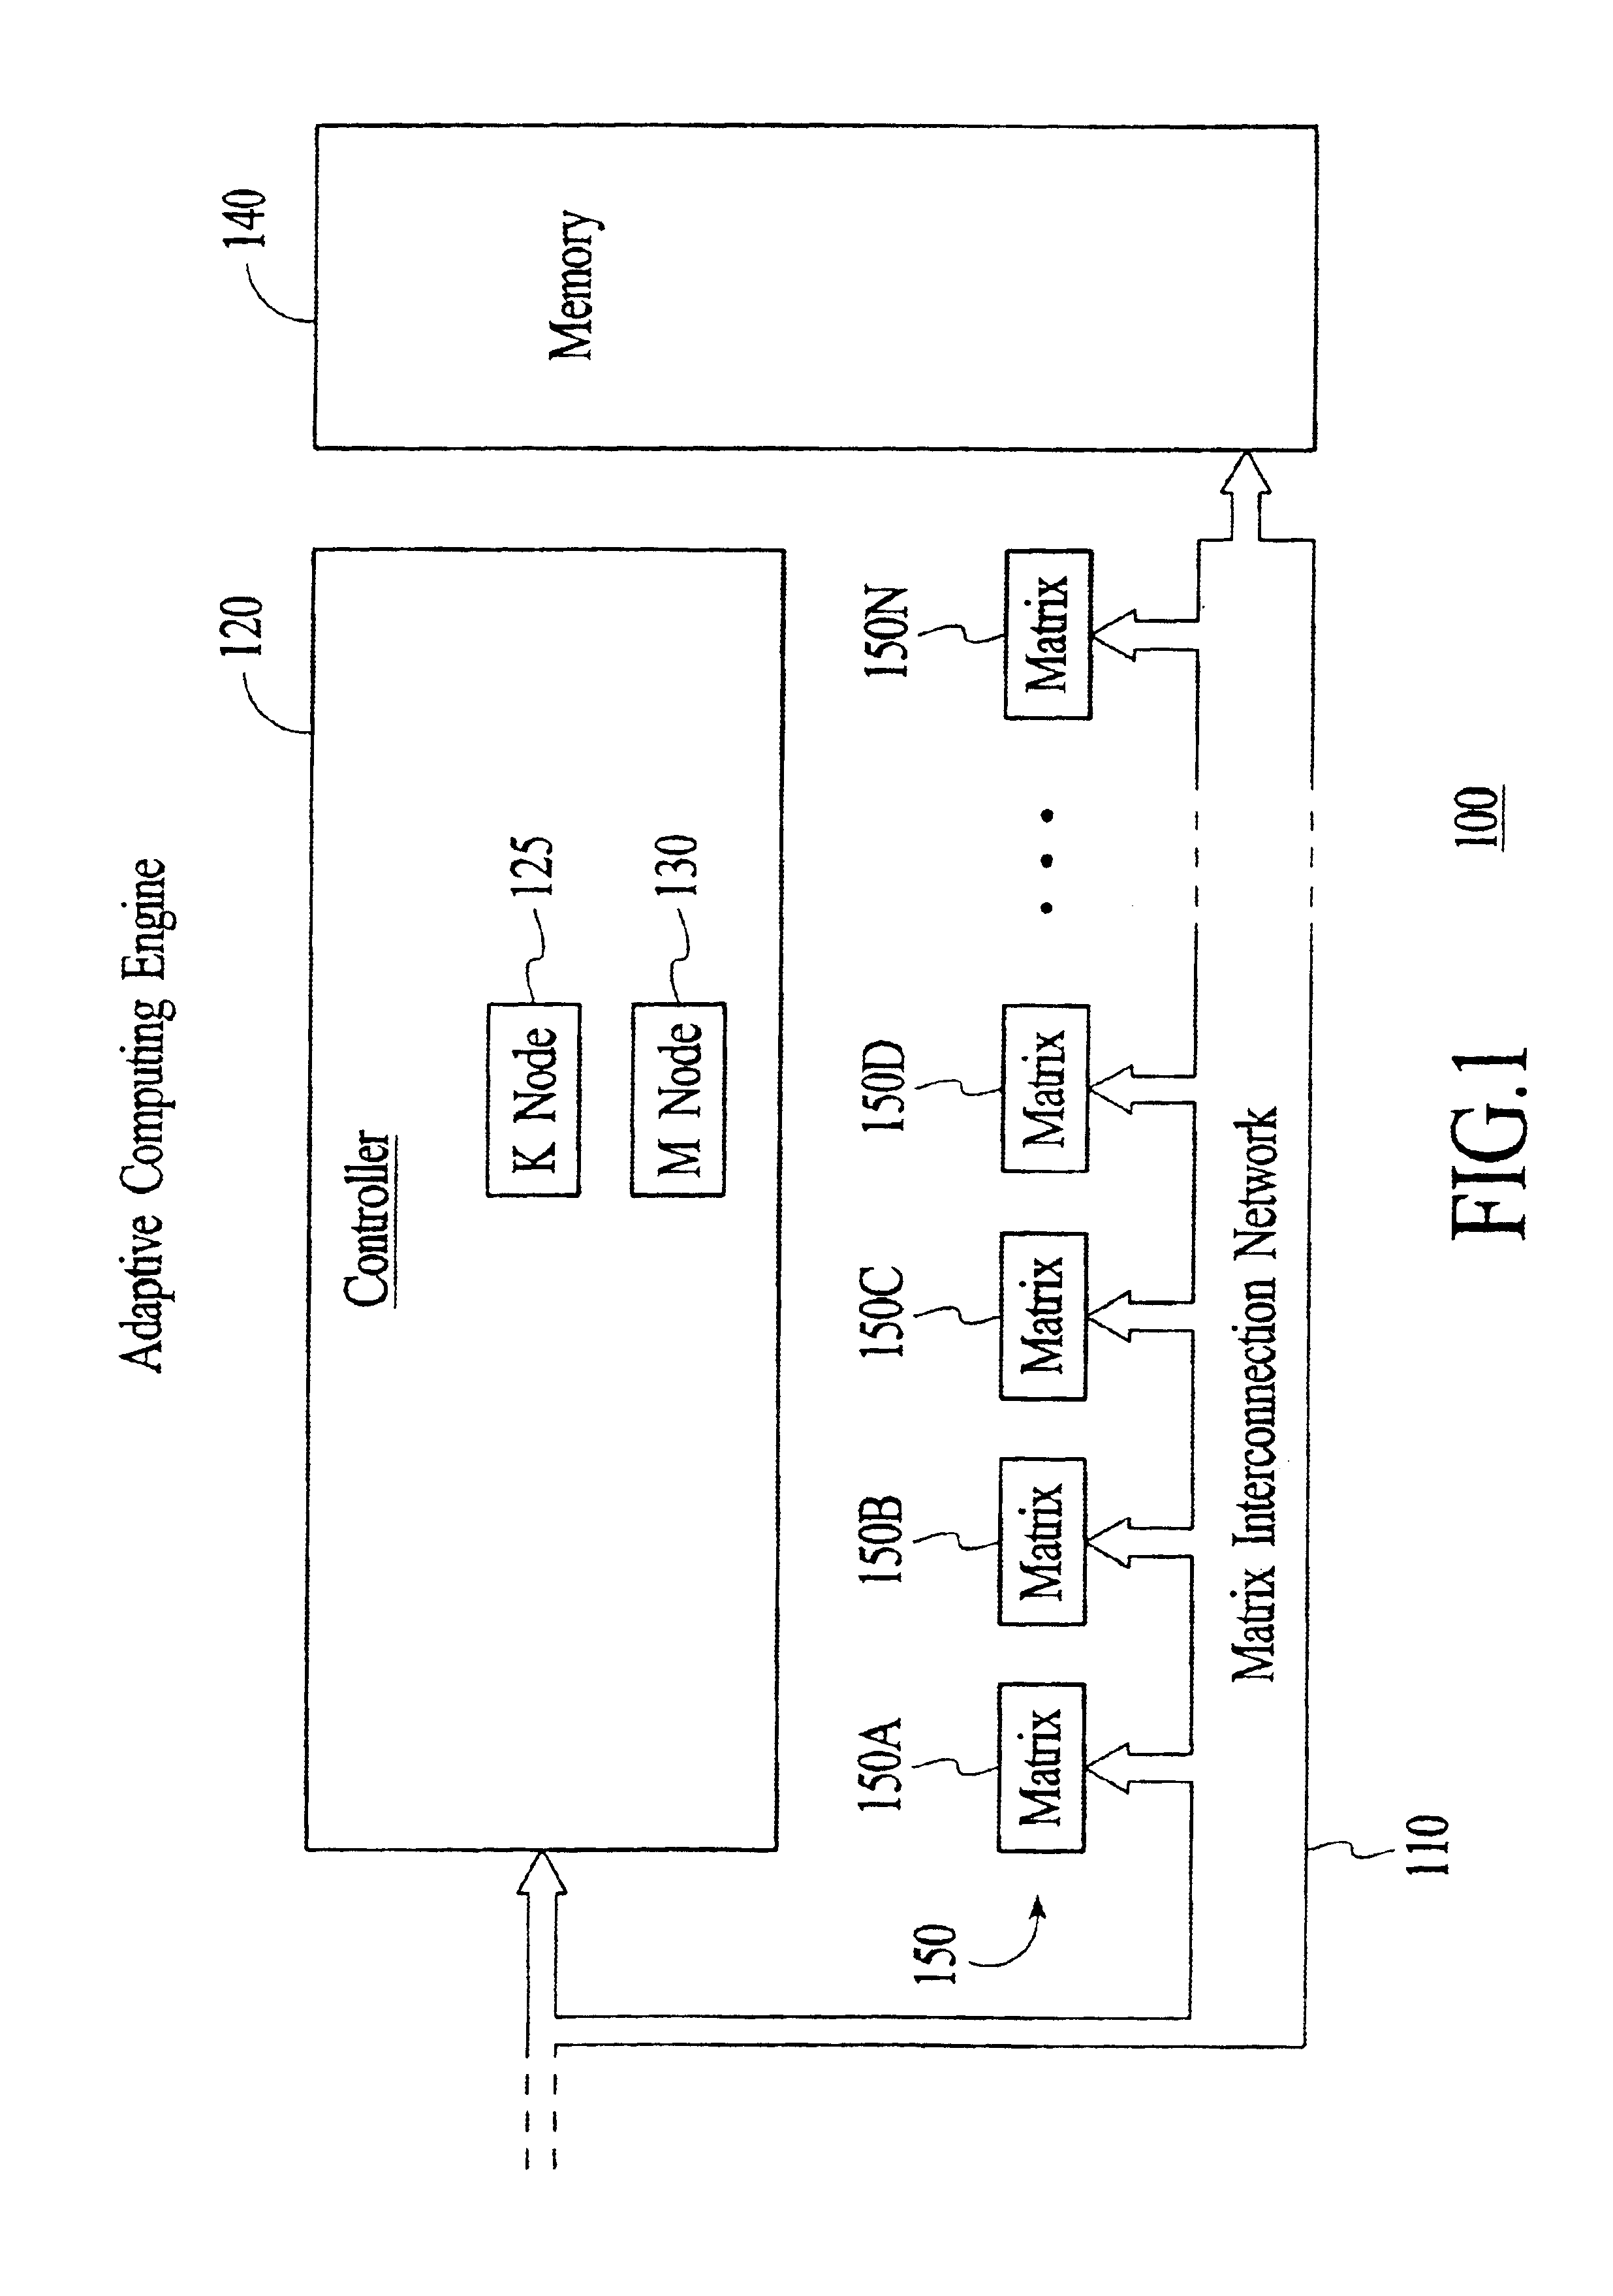 Adaptive computing engine with dataflow graph based sequencing in reconfigurable mini-matrices of composite functional blocks